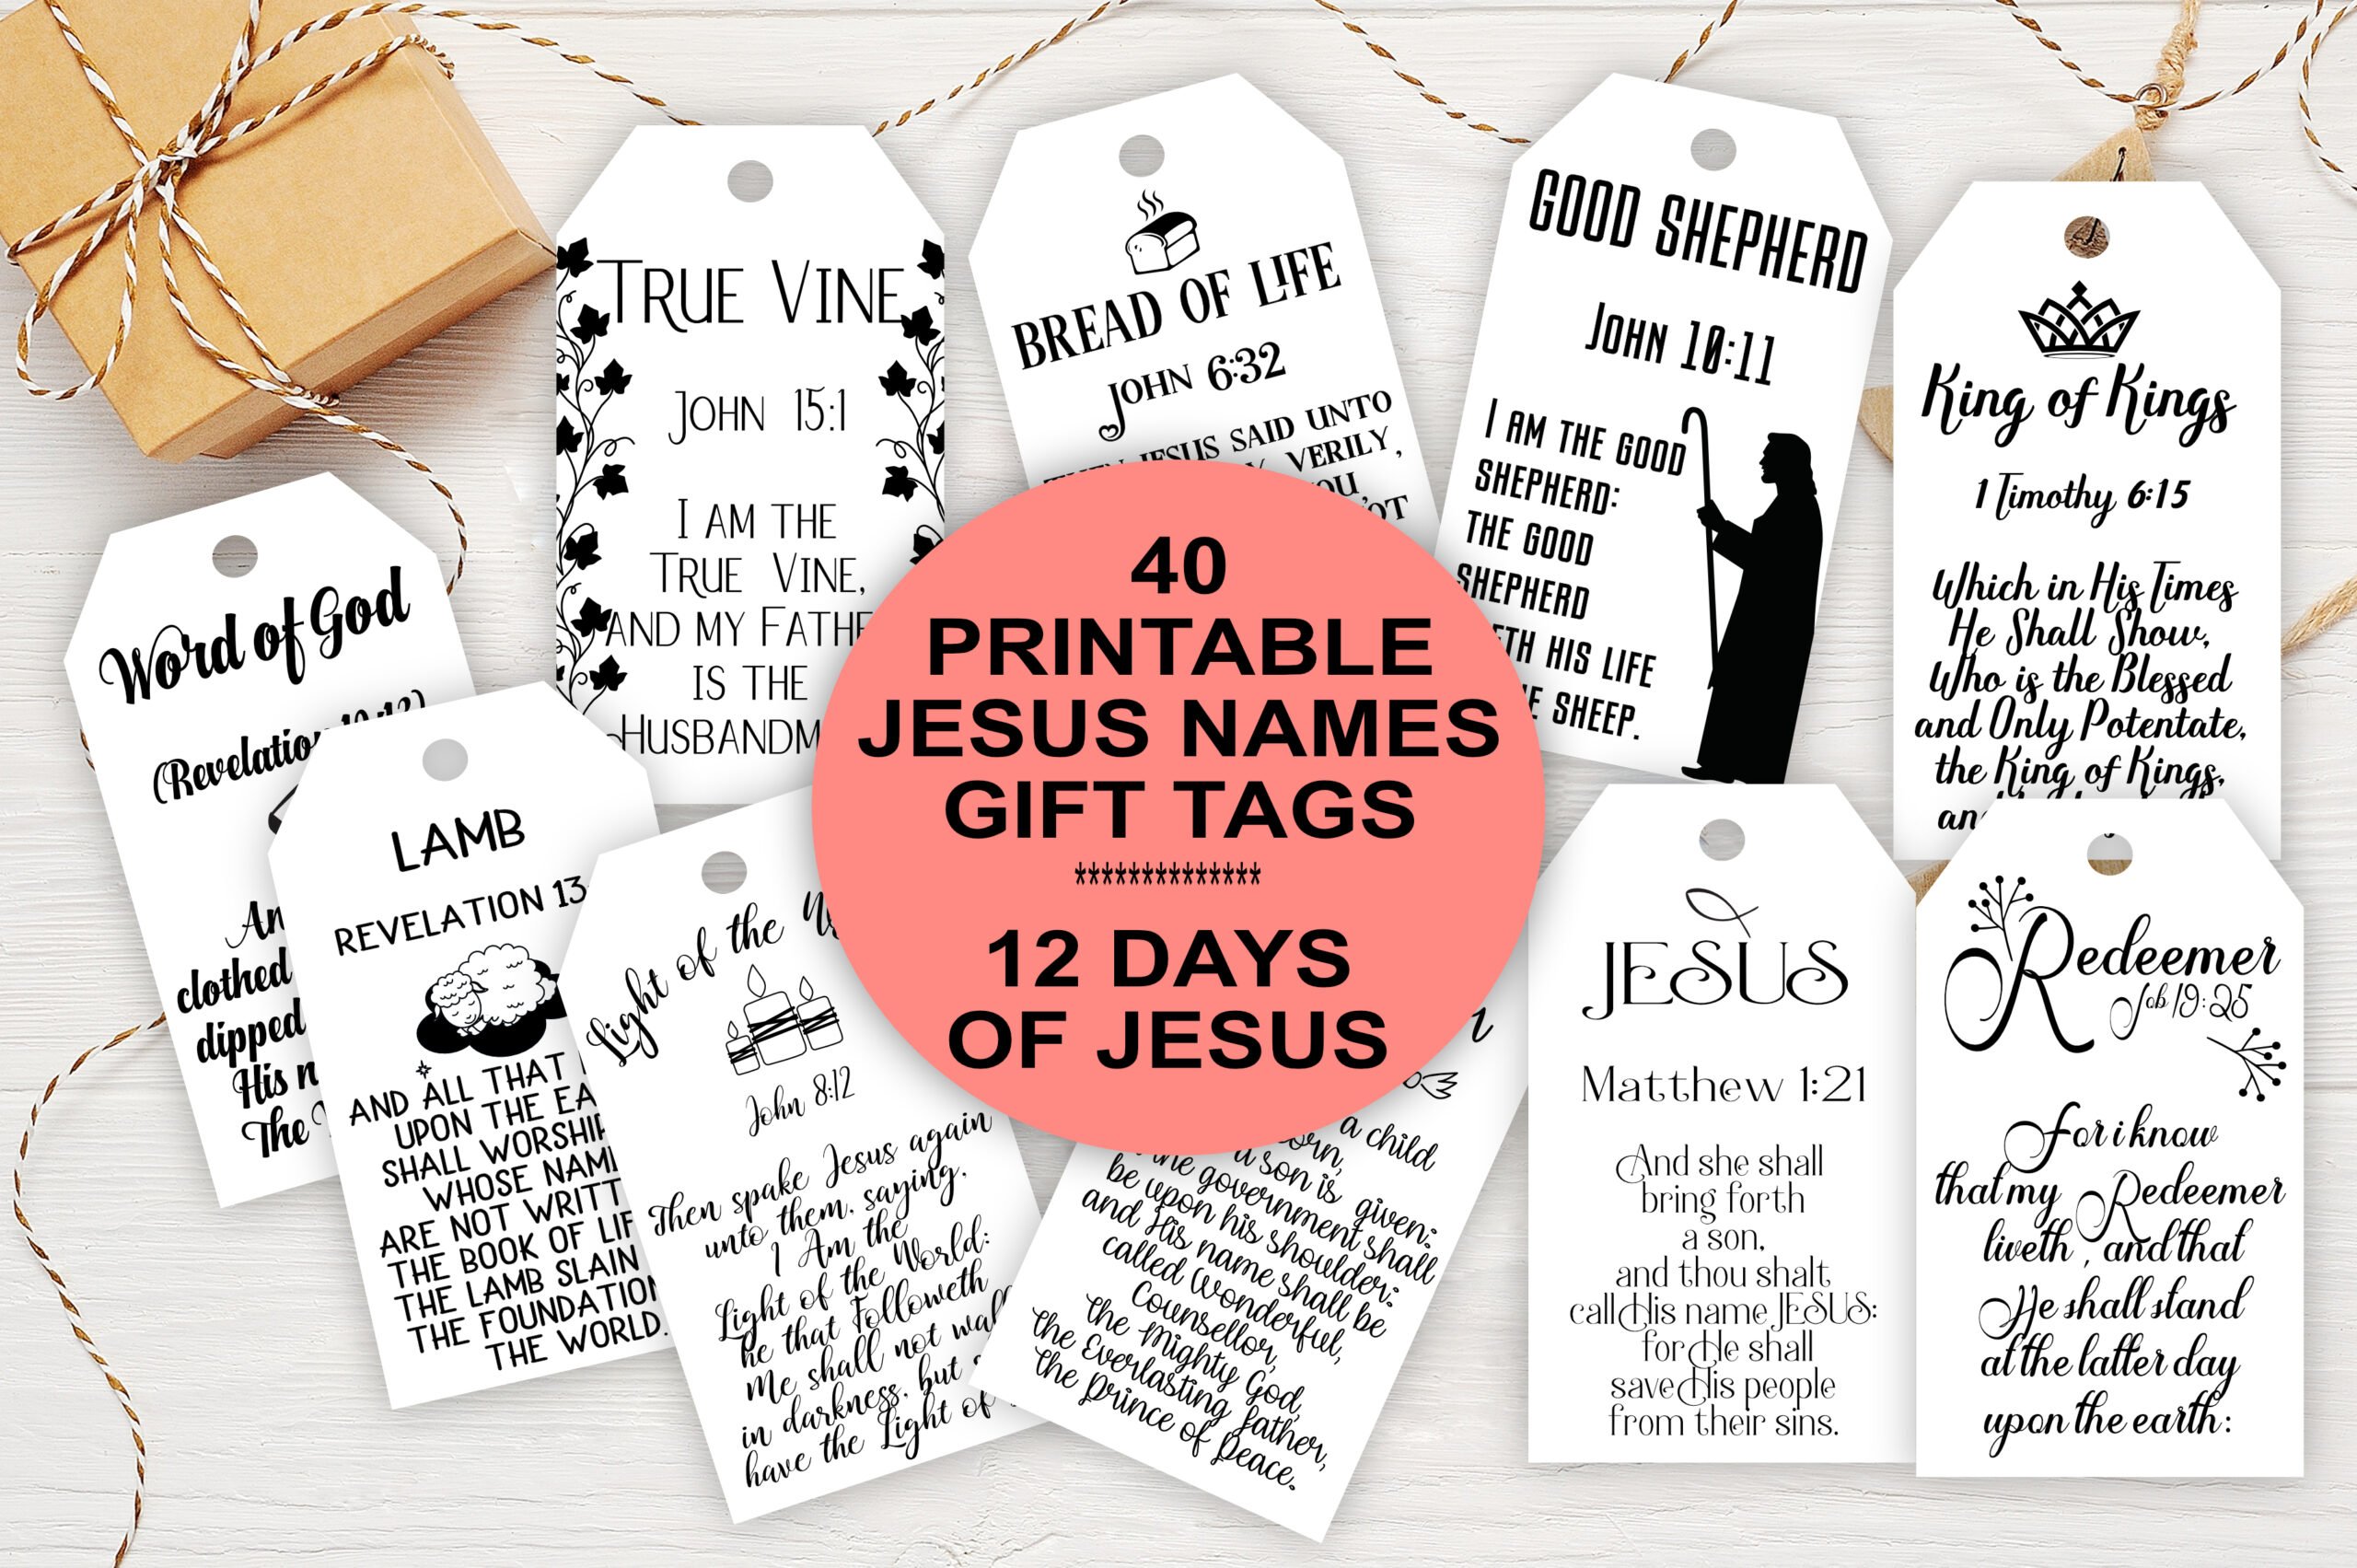 TAGS | LABELS Jesus Names Gift Tags 12 days of christmas gift tags